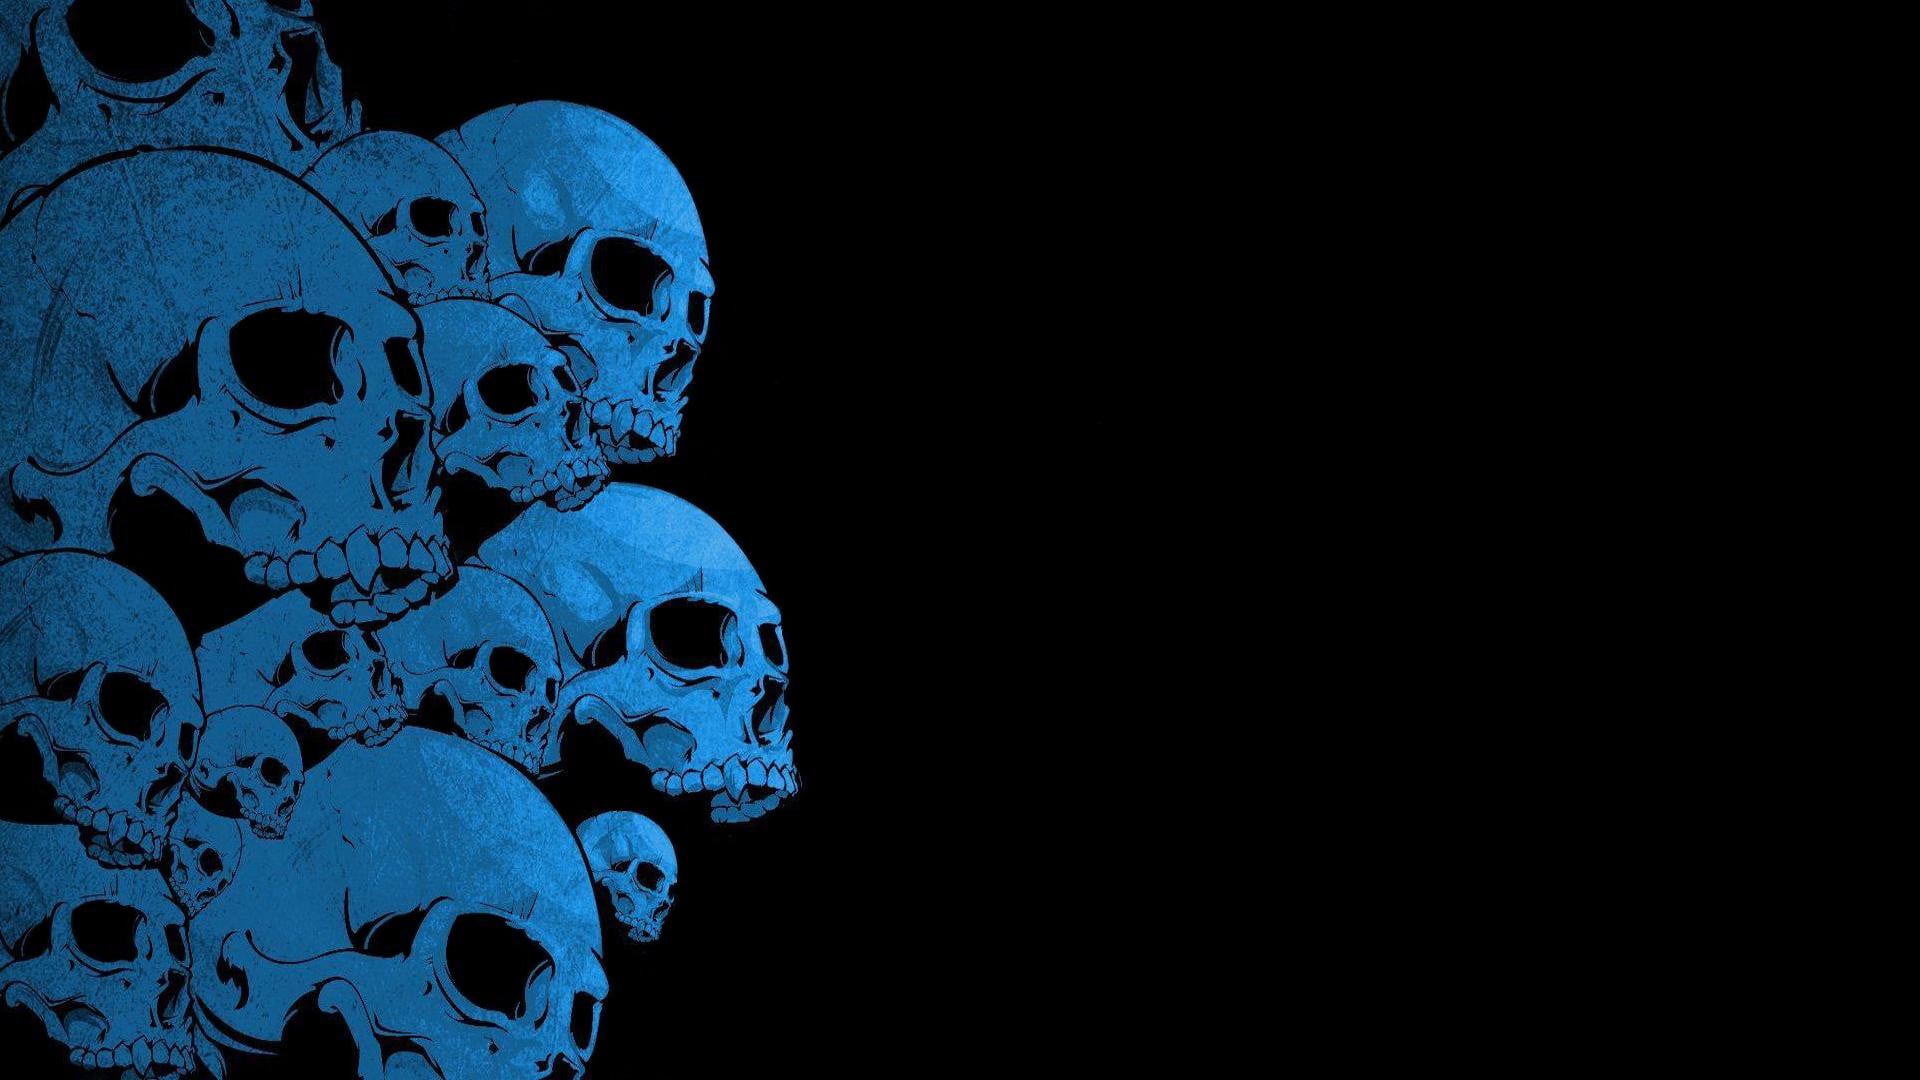 white skulls print with black background, human body part, copy space